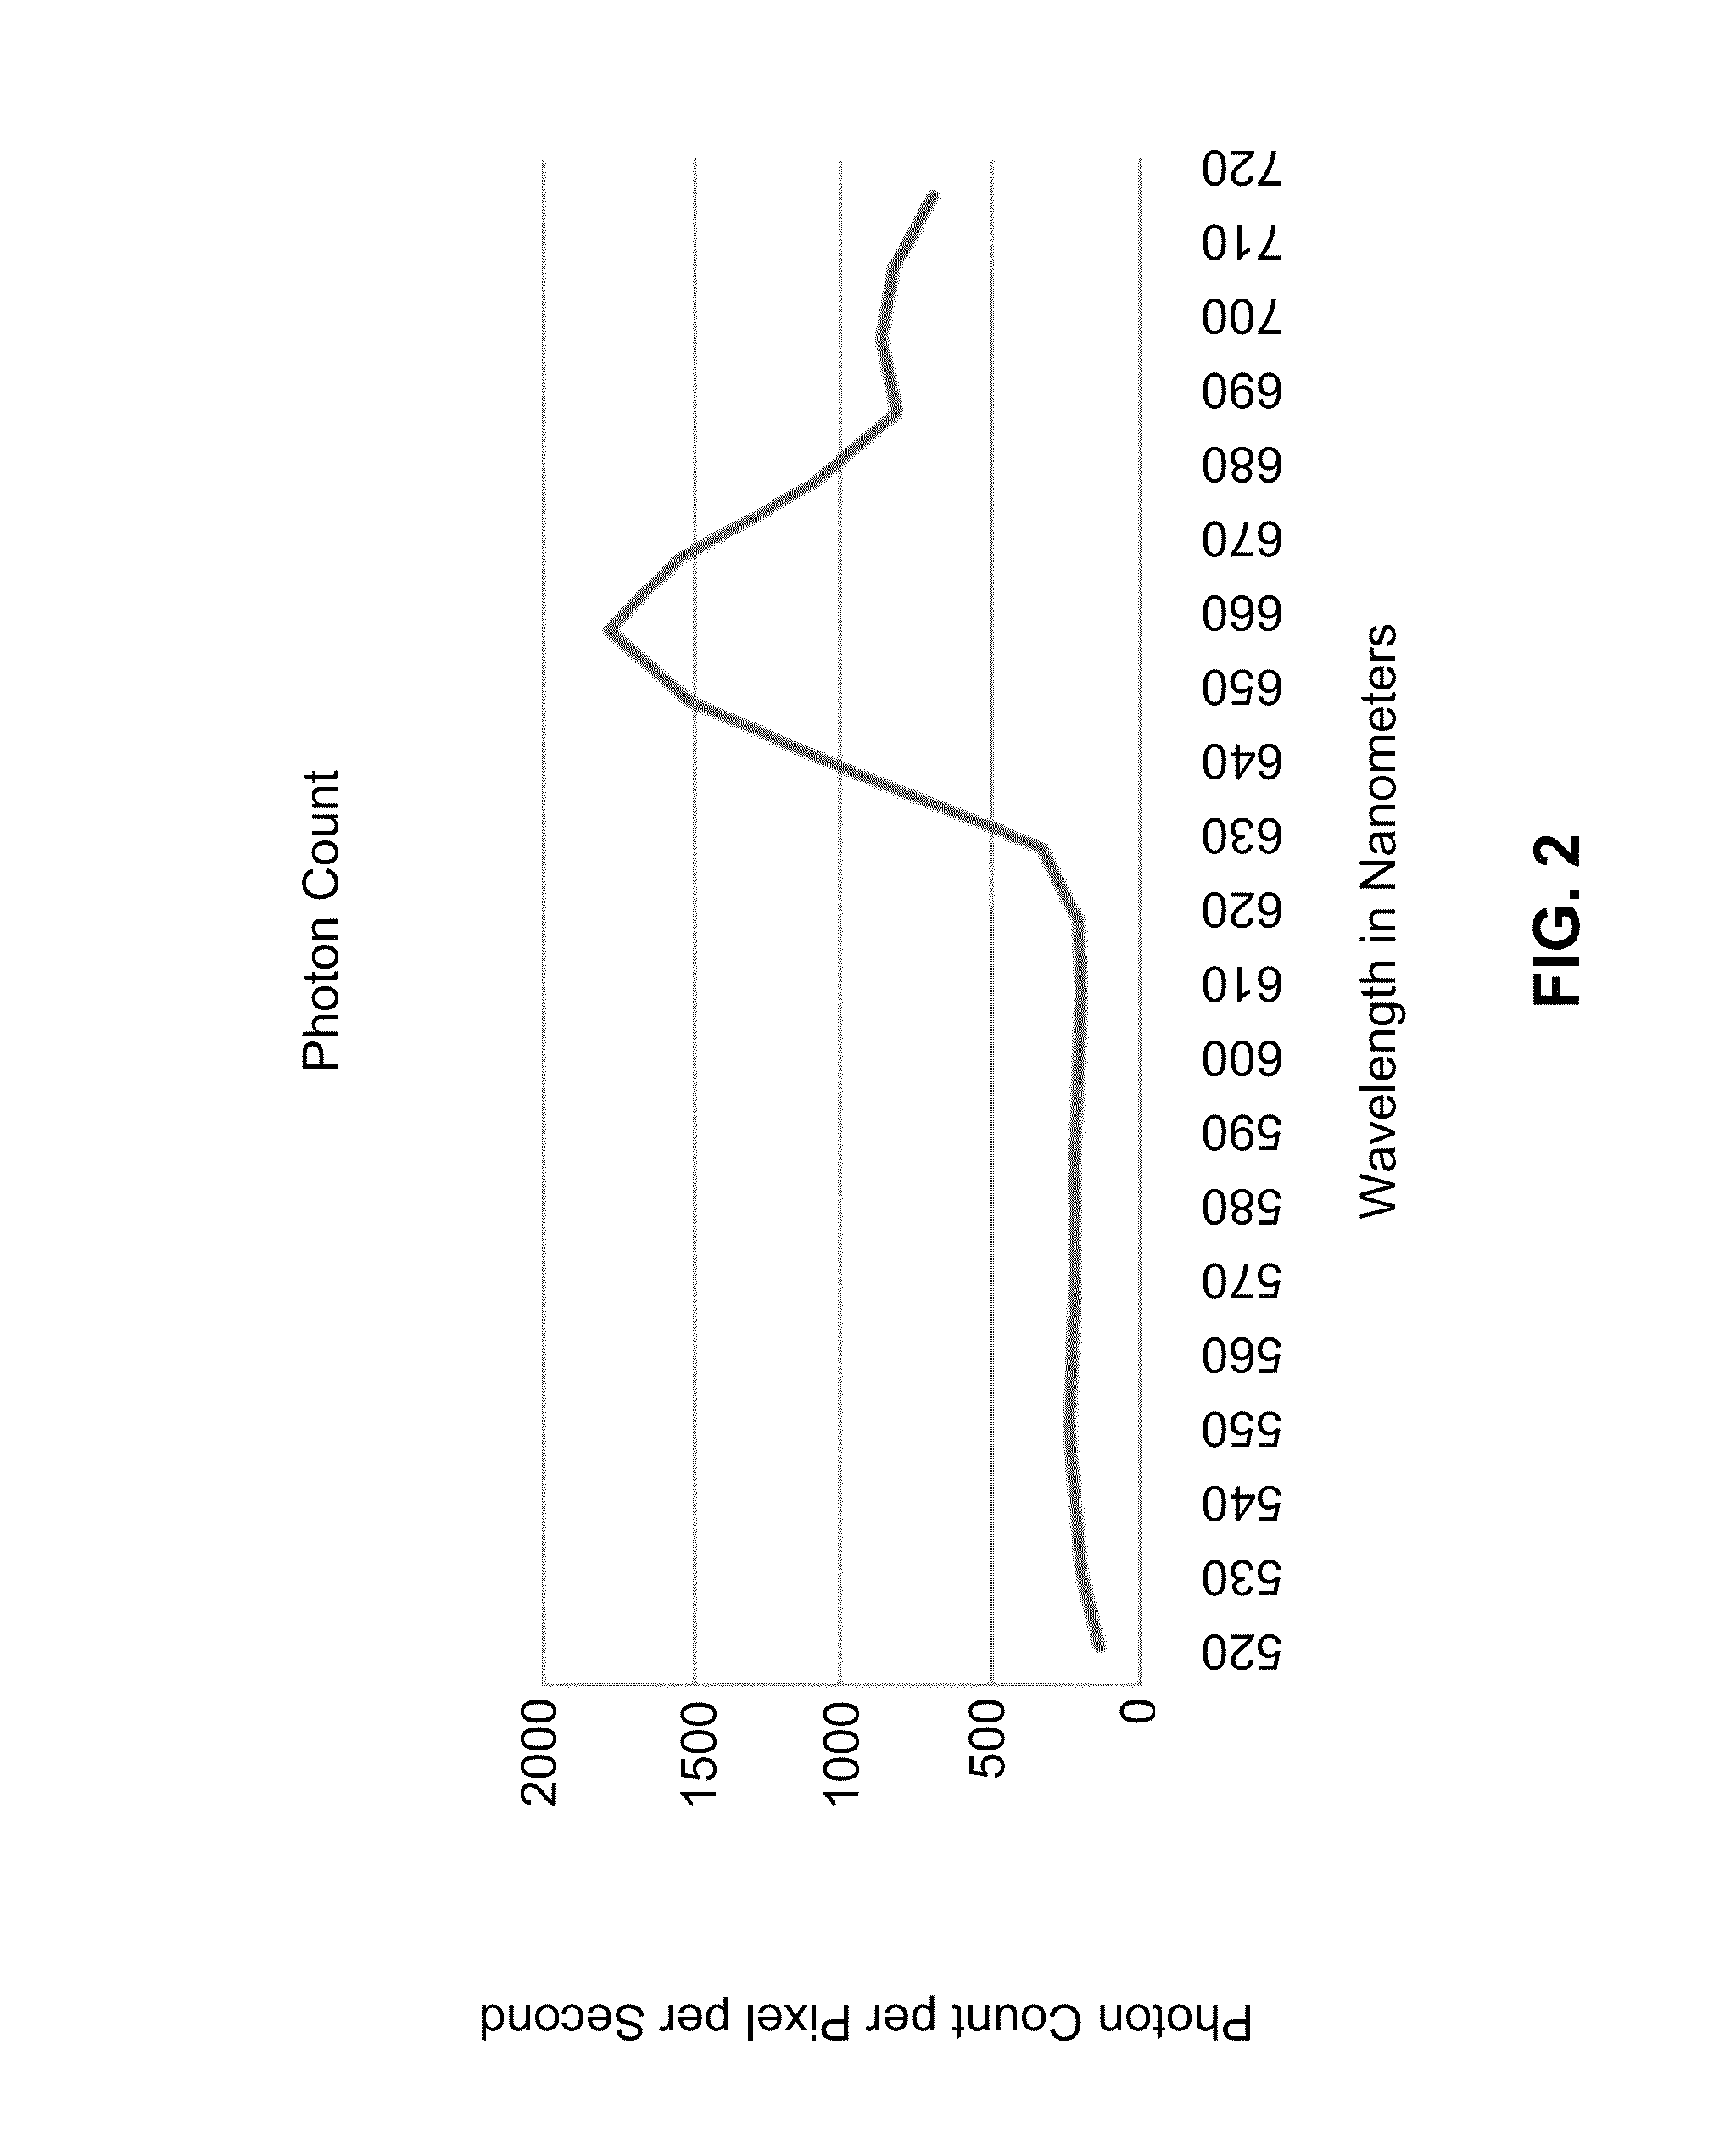 System and method for analyzing samples labeled with 5, 10, 15, 20 tetrakis (4-carboxyphenyl) porphine (TCPP)